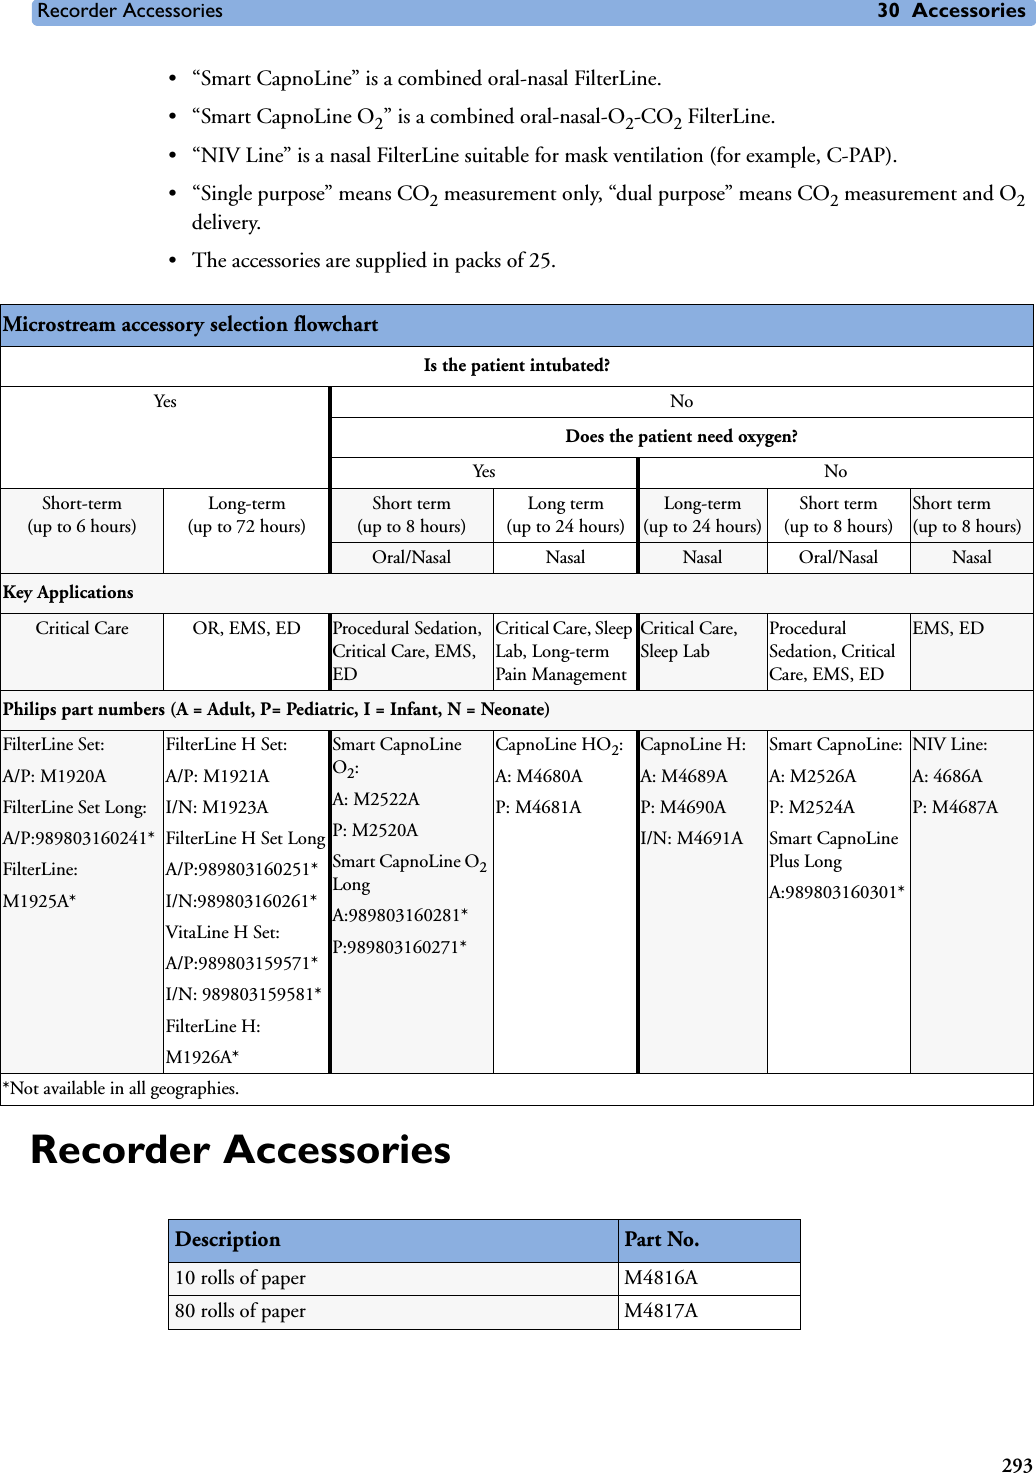 Recorder Accessories 30 Accessories293• “Smart CapnoLine” is a combined oral-nasal FilterLine. • “Smart CapnoLine O2” is a combined oral-nasal-O2-CO2 FilterLine.• “NIV Line” is a nasal FilterLine suitable for mask ventilation (for example, C-PAP).•“Single purpose” means CO2 measurement only, “dual purpose” means CO2 measurement and O2 delivery.• The accessories are supplied in packs of 25.Recorder AccessoriesMicrostream accessory selection flowchart Is the patient intubated? Yes NoDoes the patient need oxygen?Yes NoShort-term(up to 6 hours)Long-term(up to 72 hours)Short term(up to 8 hours)Long term(up to 24 hours)Long-term(up to 24 hours)Short term(up to 8 hours)Short term(up to 8 hours)Oral/Nasal Nasal Nasal Oral/Nasal NasalKey ApplicationsCritical Care OR, EMS, ED Procedural Sedation, Critical Care, EMS, EDCritical Care, Sleep Lab, Long-term Pain ManagementCritical Care, Sleep LabProcedural Sedation, Critical Care, EMS, EDEMS, EDPhilips part numbers (A = Adult, P= Pediatric, I = Infant, N = Neonate)FilterLine Set:A/P: M1920AFilterLine Set Long:A/P:989803160241*FilterLine:M1925A*FilterLine H Set:A/P: M1921AI/N: M1923AFilterLine H Set LongA/P:989803160251*I/N:989803160261*VitaLine H Set:A/P:989803159571*I/N: 989803159581*FilterLine H:M1926A*Smart CapnoLine O2:A: M2522AP: M2520ASmart CapnoLine O2 LongA:989803160281*P:989803160271*CapnoLine HO2:A: M4680AP: M4681ACapnoLine H:A: M4689AP: M4690AI/N: M4691ASmart CapnoLine:A: M2526AP: M2524ASmart CapnoLine Plus LongA:989803160301*NIV Line:A: 4686AP: M4687A*Not available in all geographies.Description Part No. 10 rolls of paper M4816A80 rolls of paper M4817A